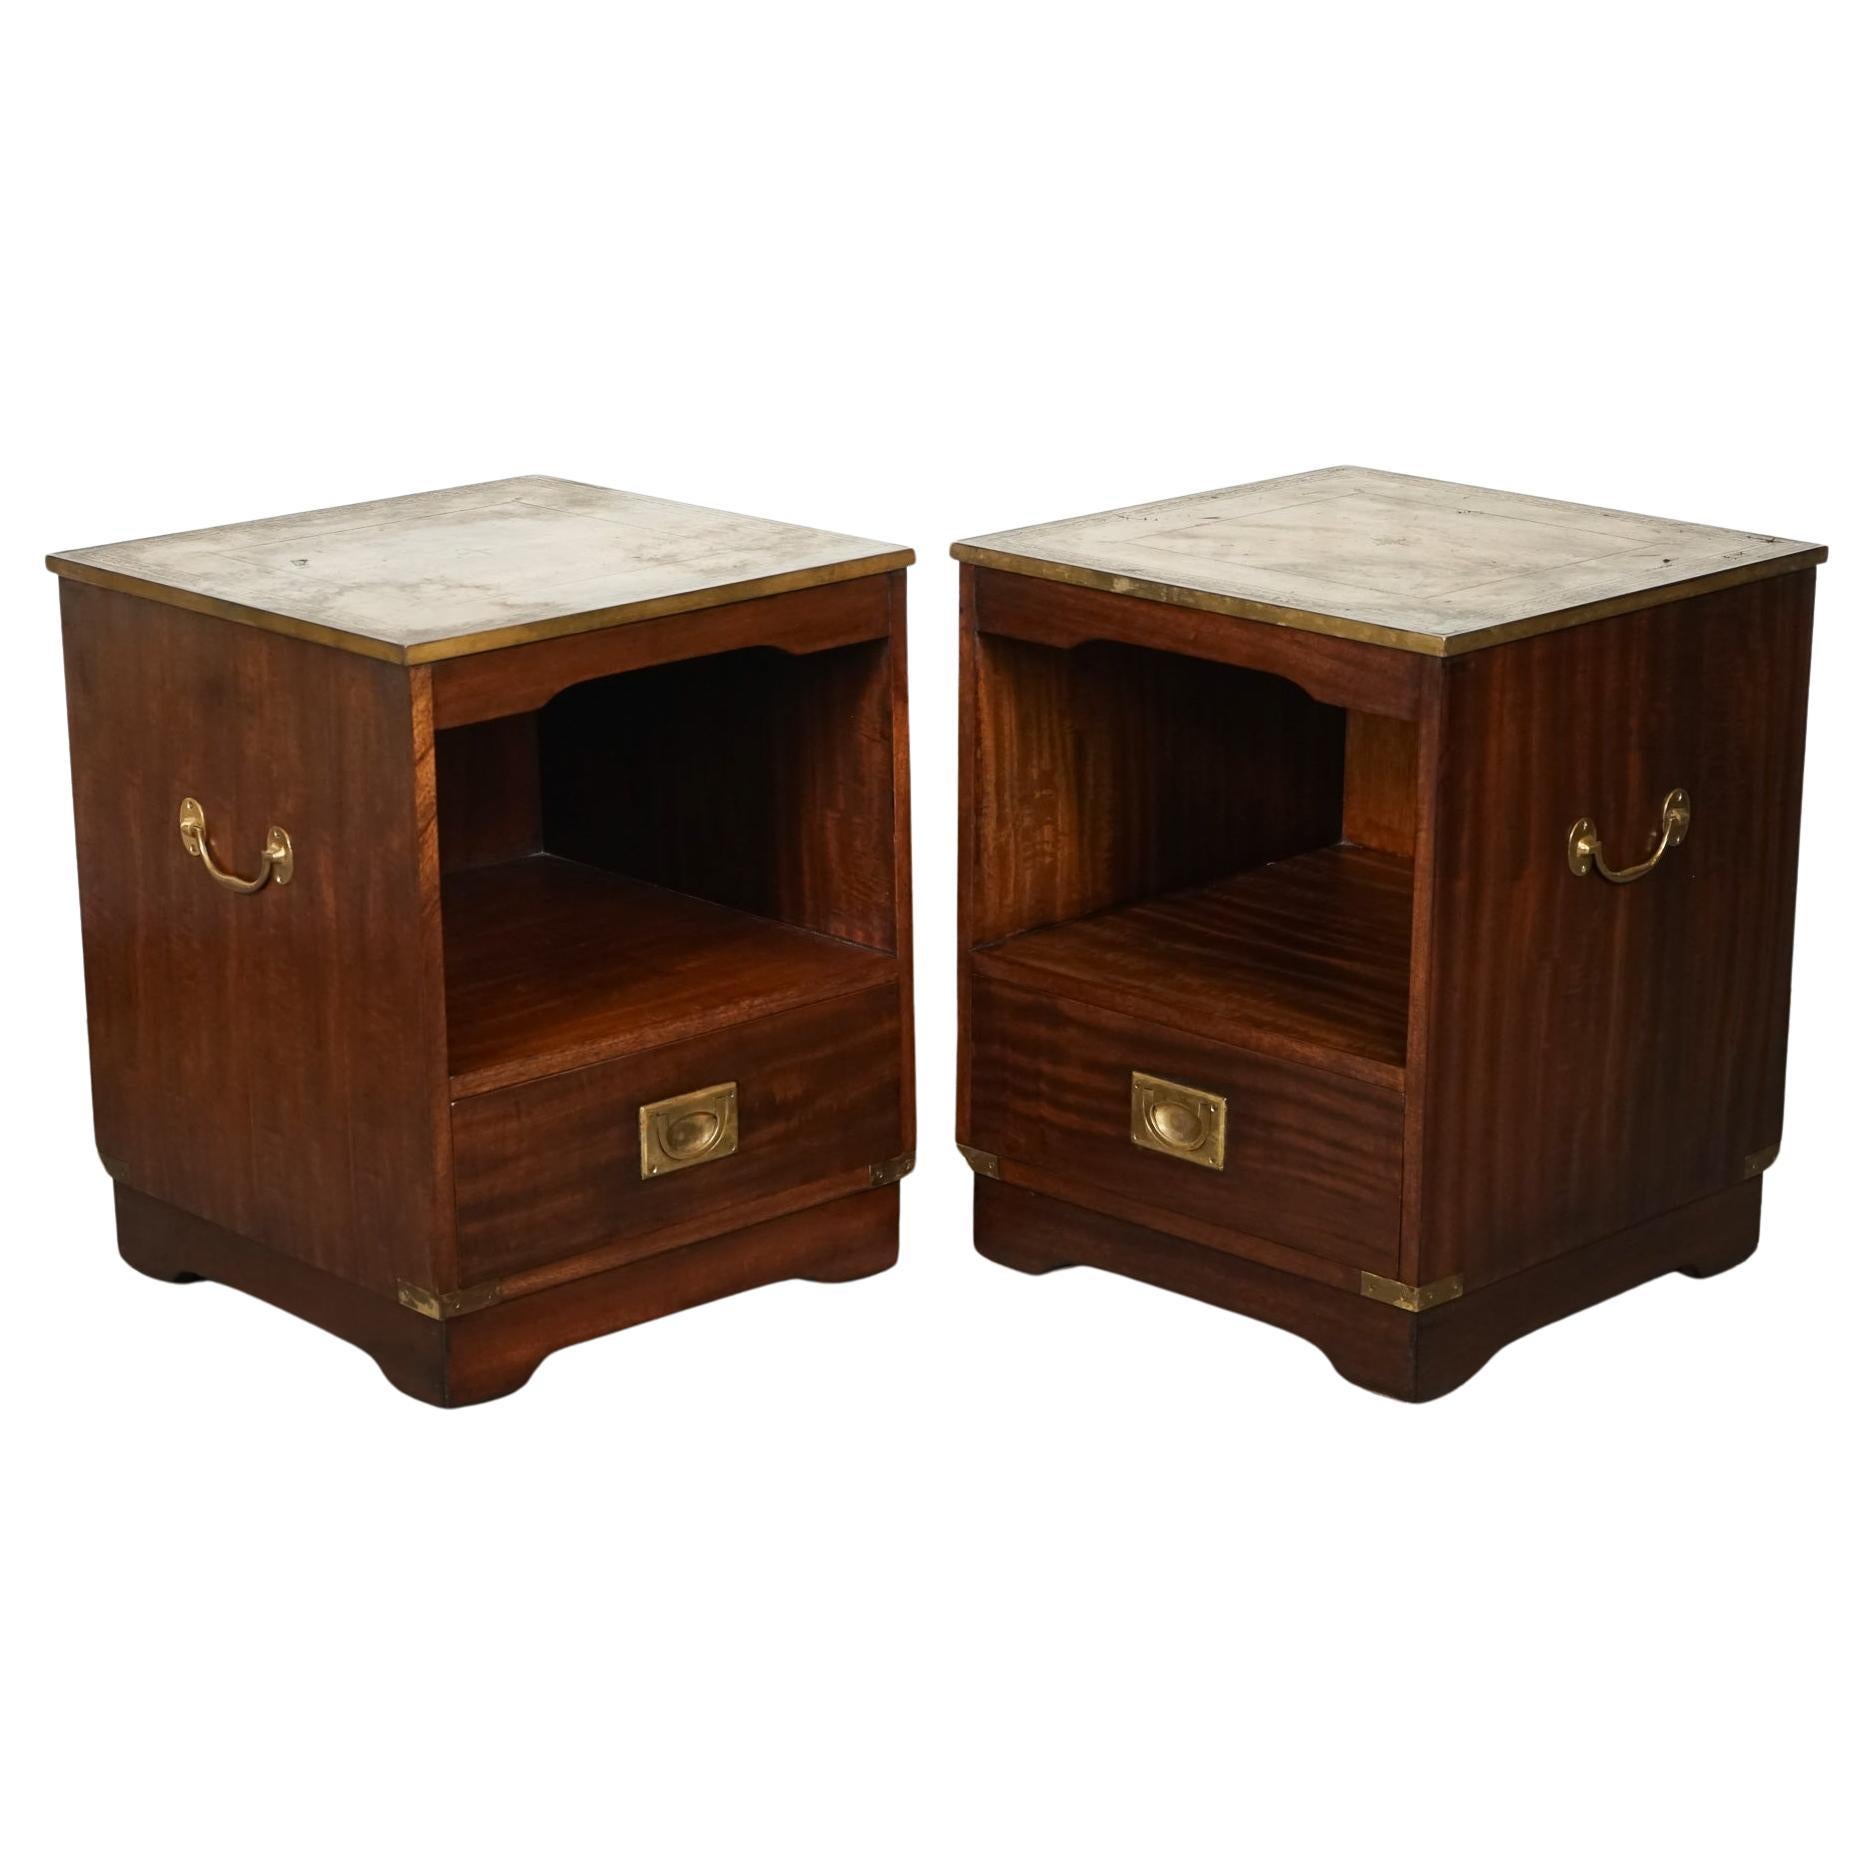 VINTAGE PAIR OF MILITARY CAMPAIGN BEDSIDE TABLES NiGHTSTANDS BROWN LEATHER TOPJ1 For Sale